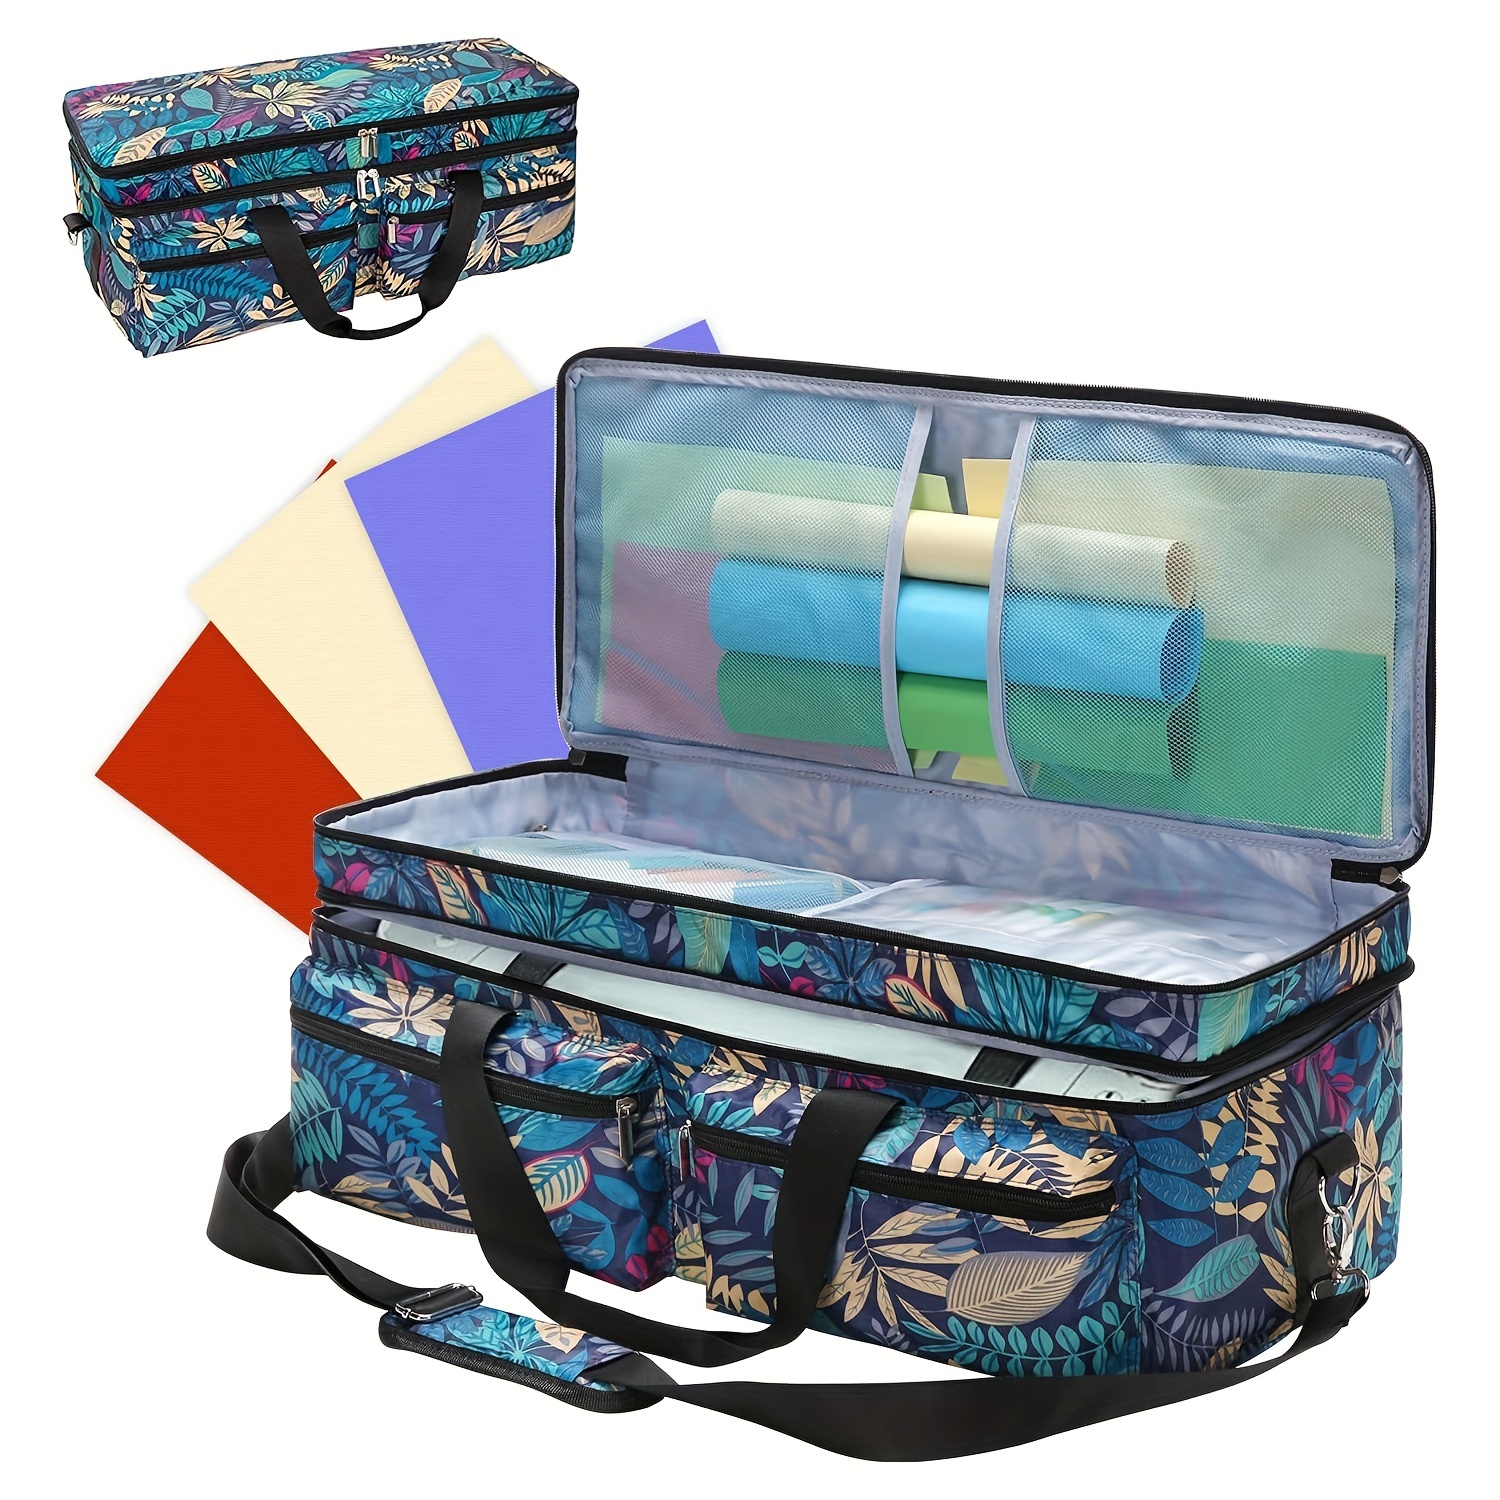 Carrying Case, For Cricut Explore Air 1 2 3, Double-layer Bag